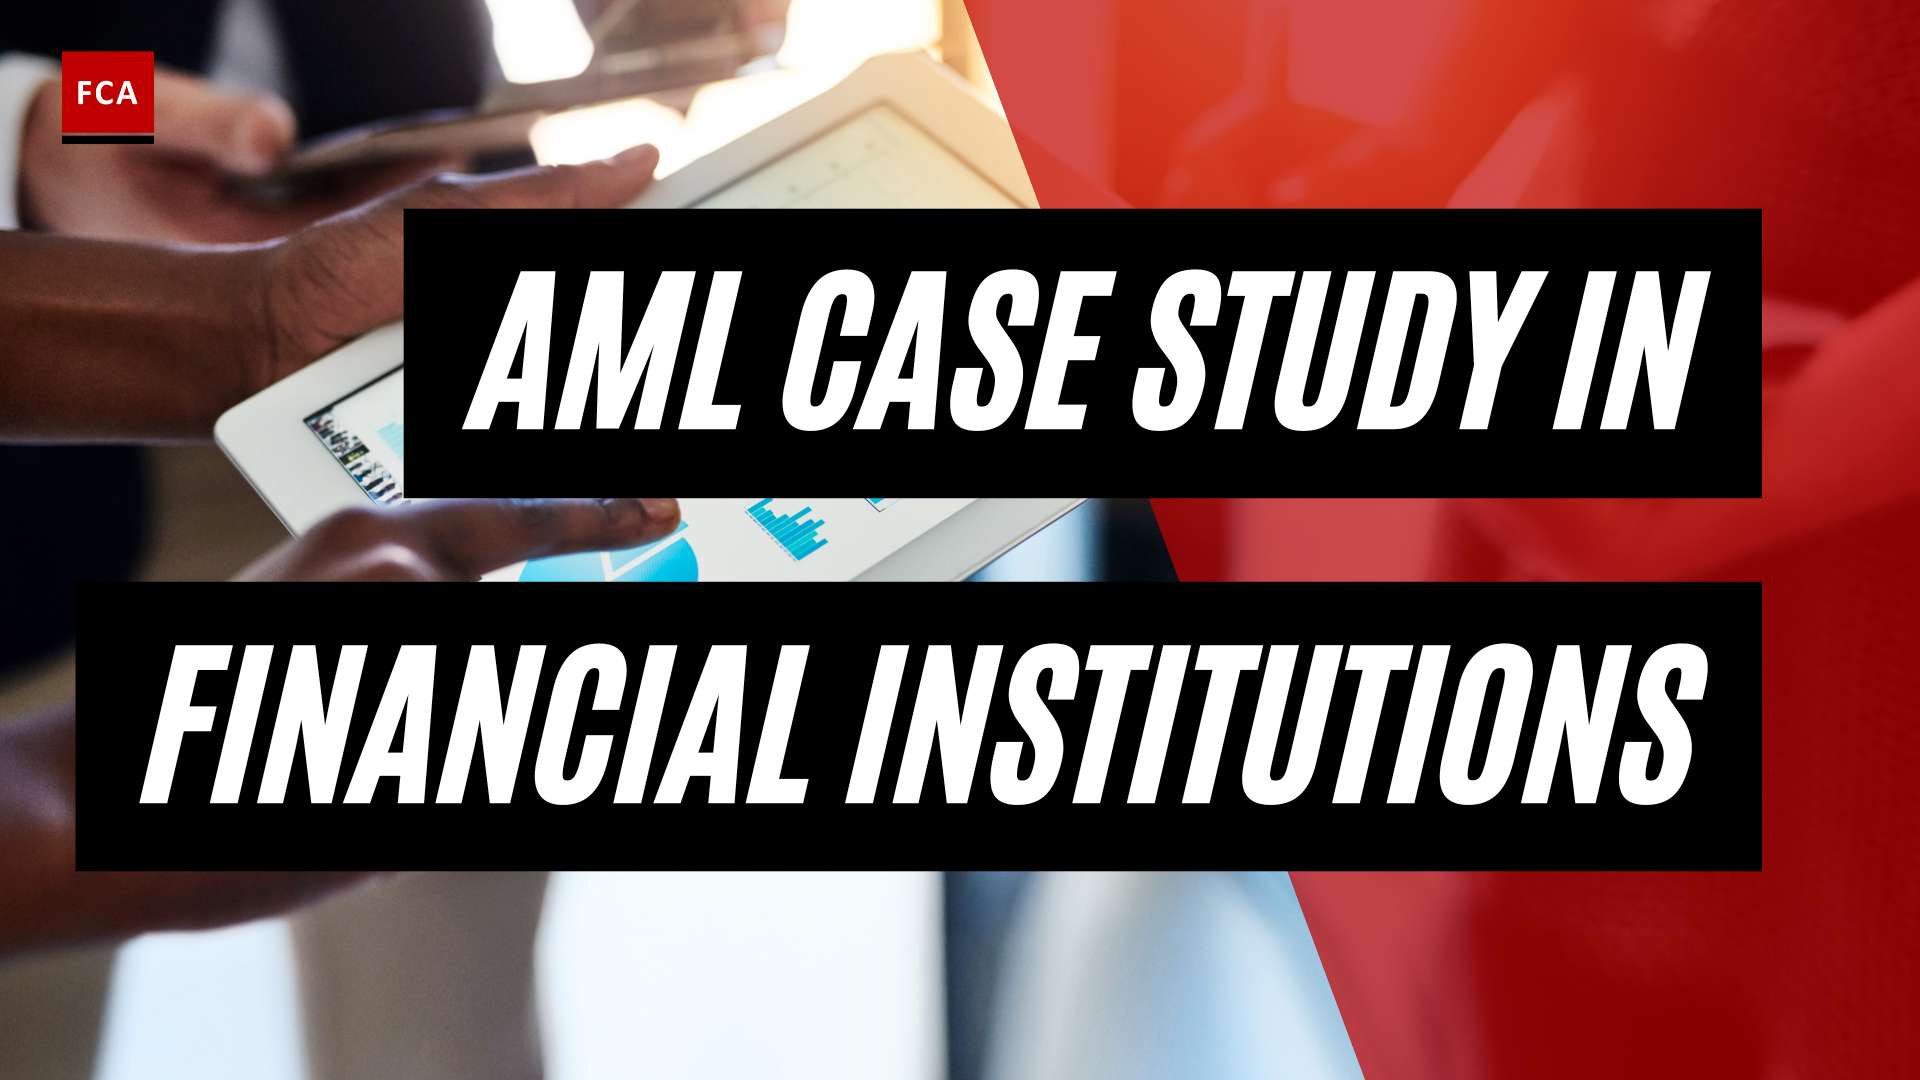 From Theory To Practice: Aml Case Studies In Real Financial Institutions